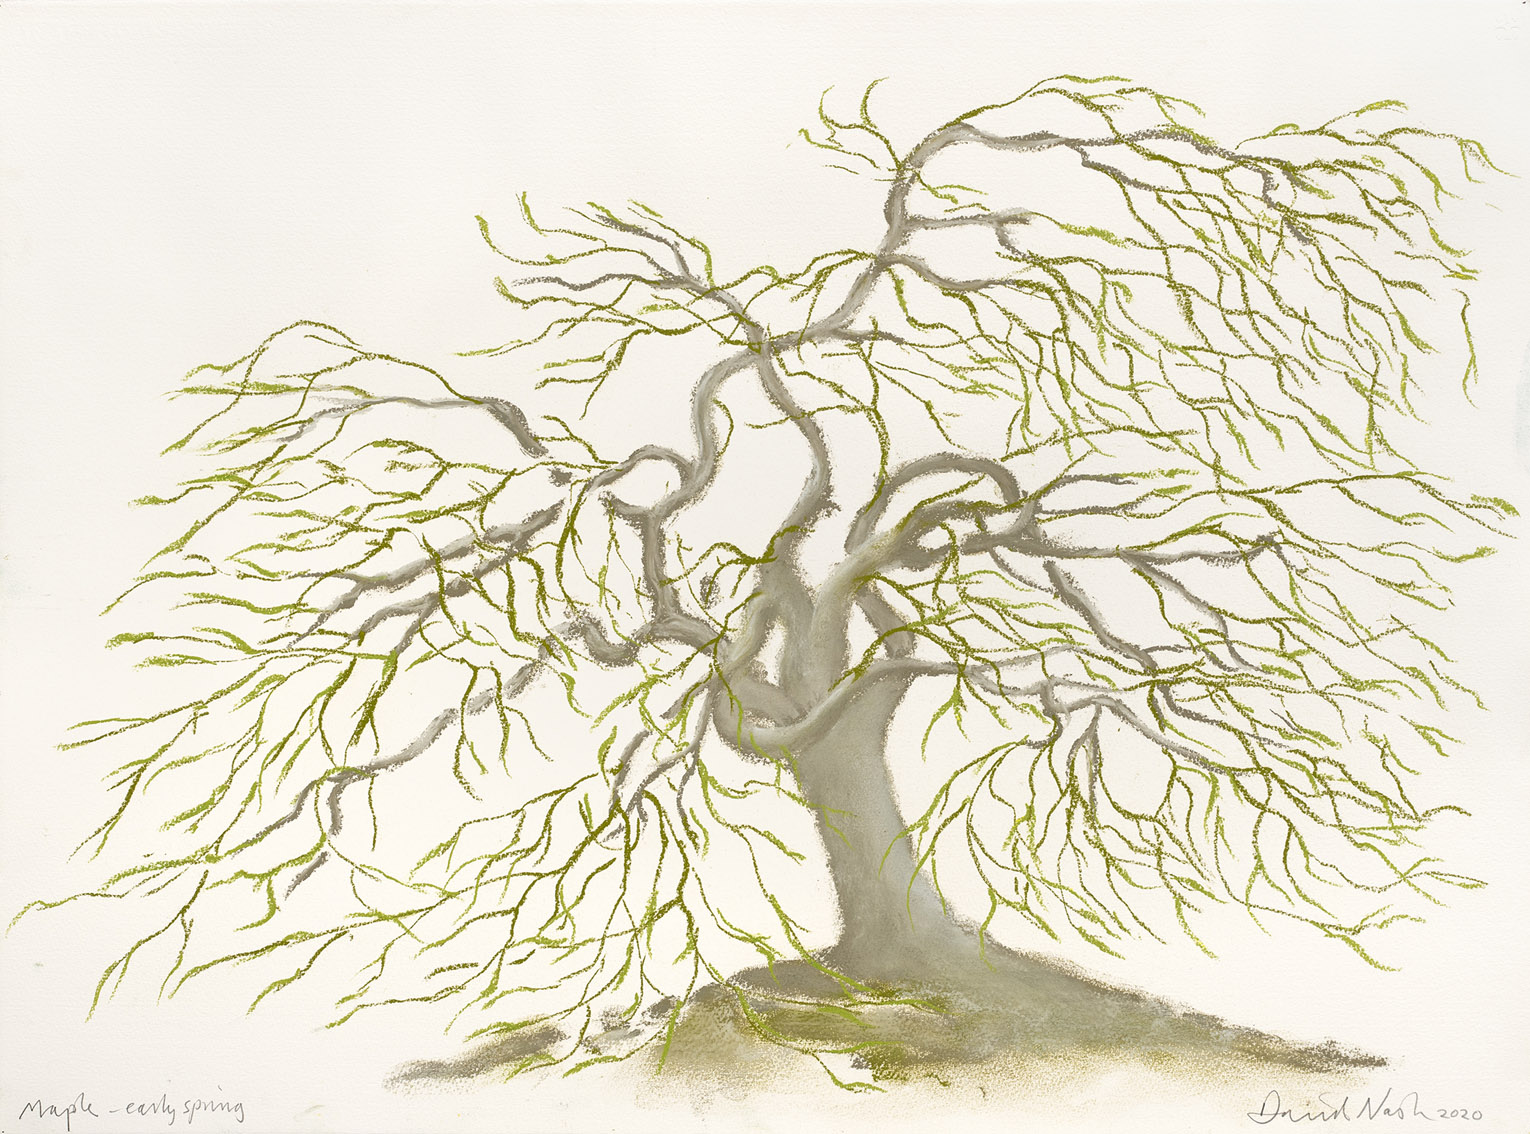 oeuvres Maple - Early spring David Nash